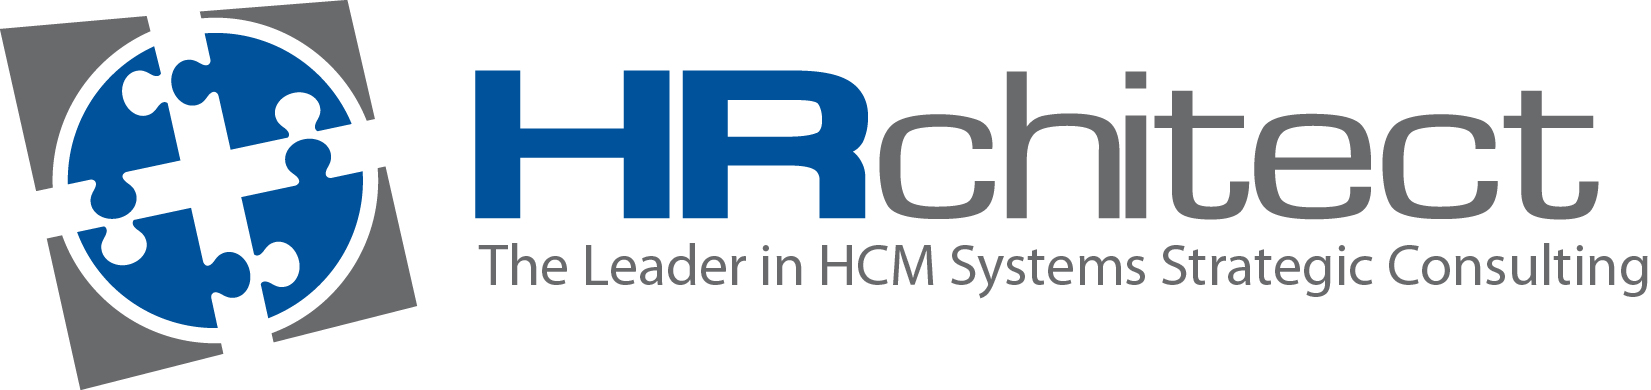 HRchitect logo HiRes with HCM tag